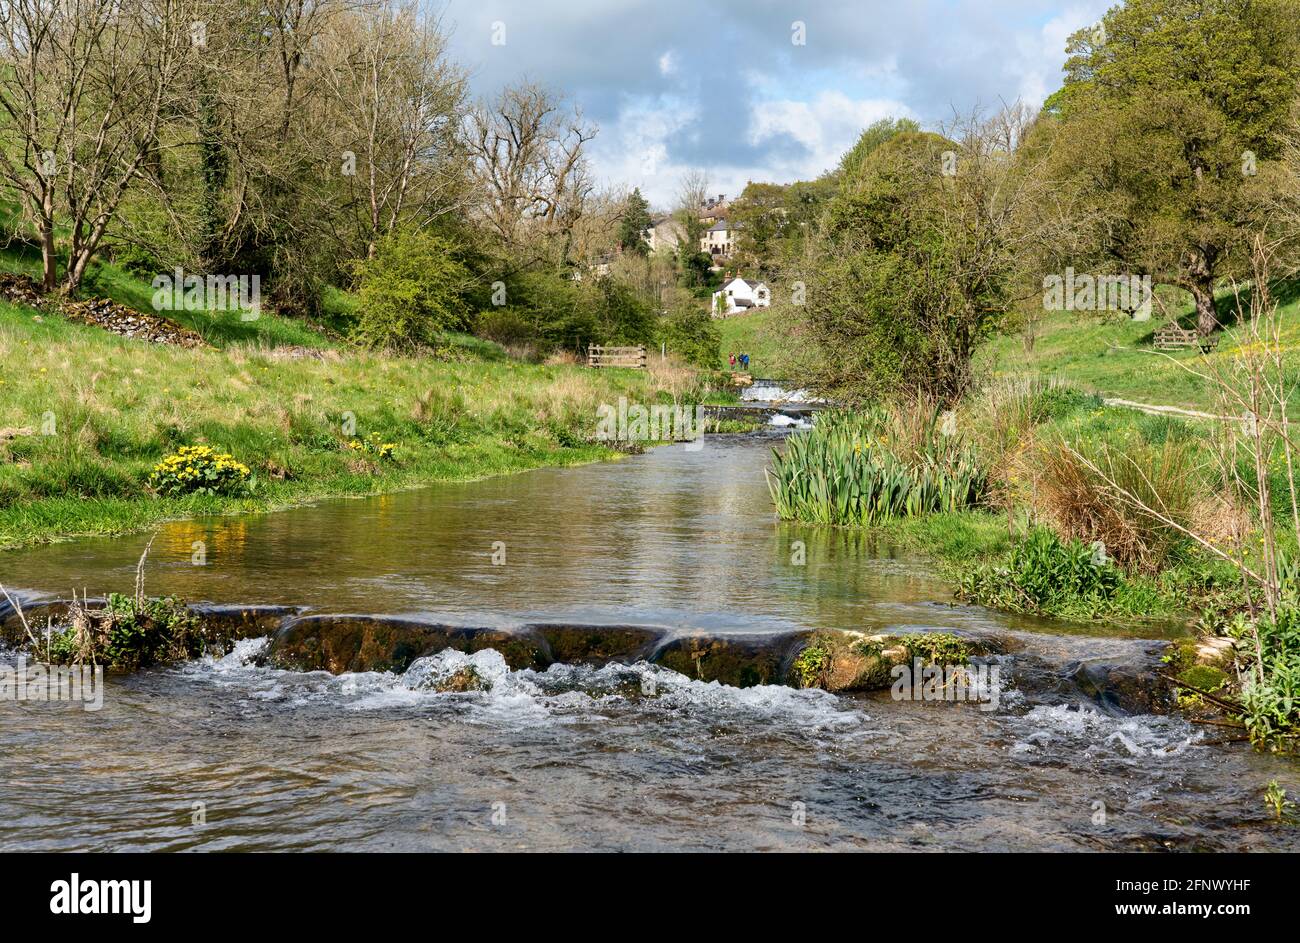 The River Bradford at Bradford Dale in the Derbyshire Peak District below the village of Youlgrave Stock Photo